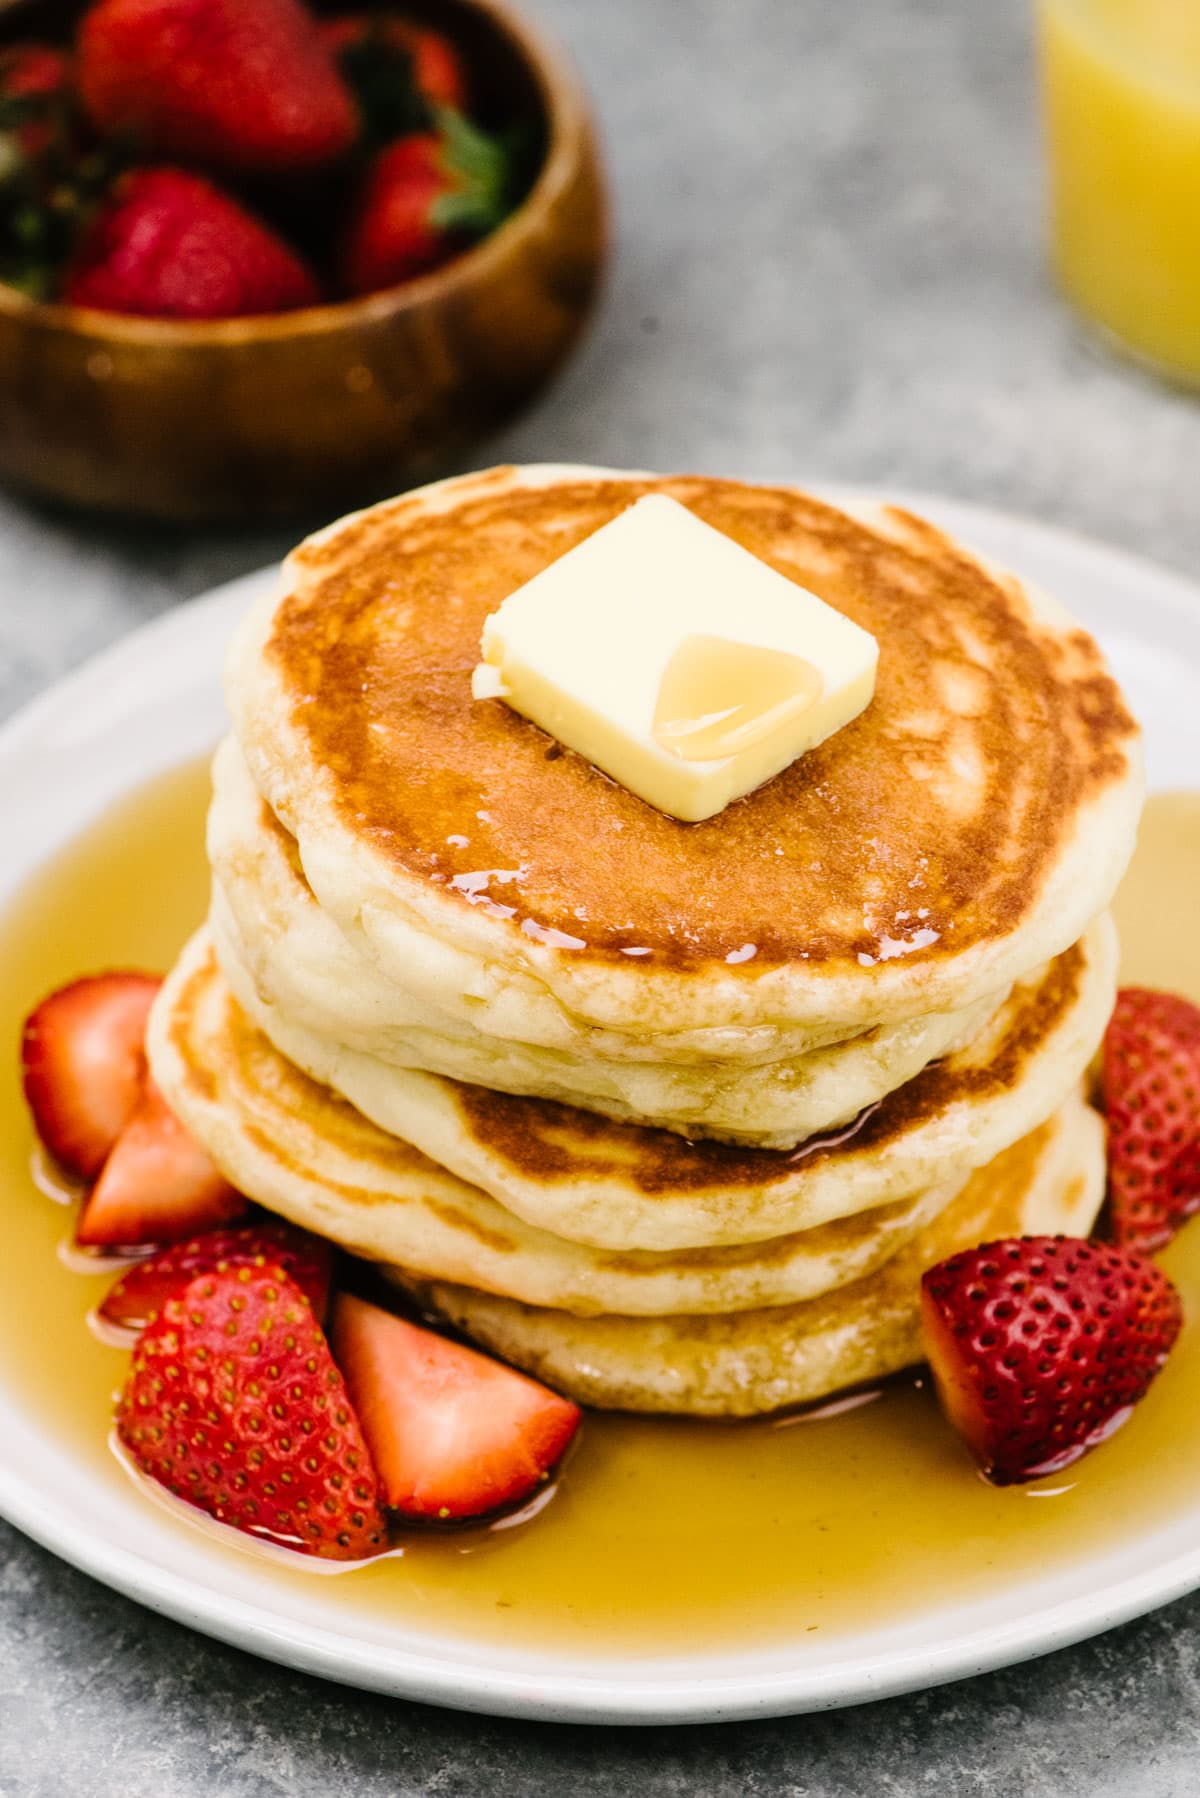 Side view, a stack of homemade fluffy pancakes on a white plate topped with butter and drizzled with maple syrup. The plate has sliced strawberries to the side. A glass of orange juice and bowl of fresh strawberries in the background.